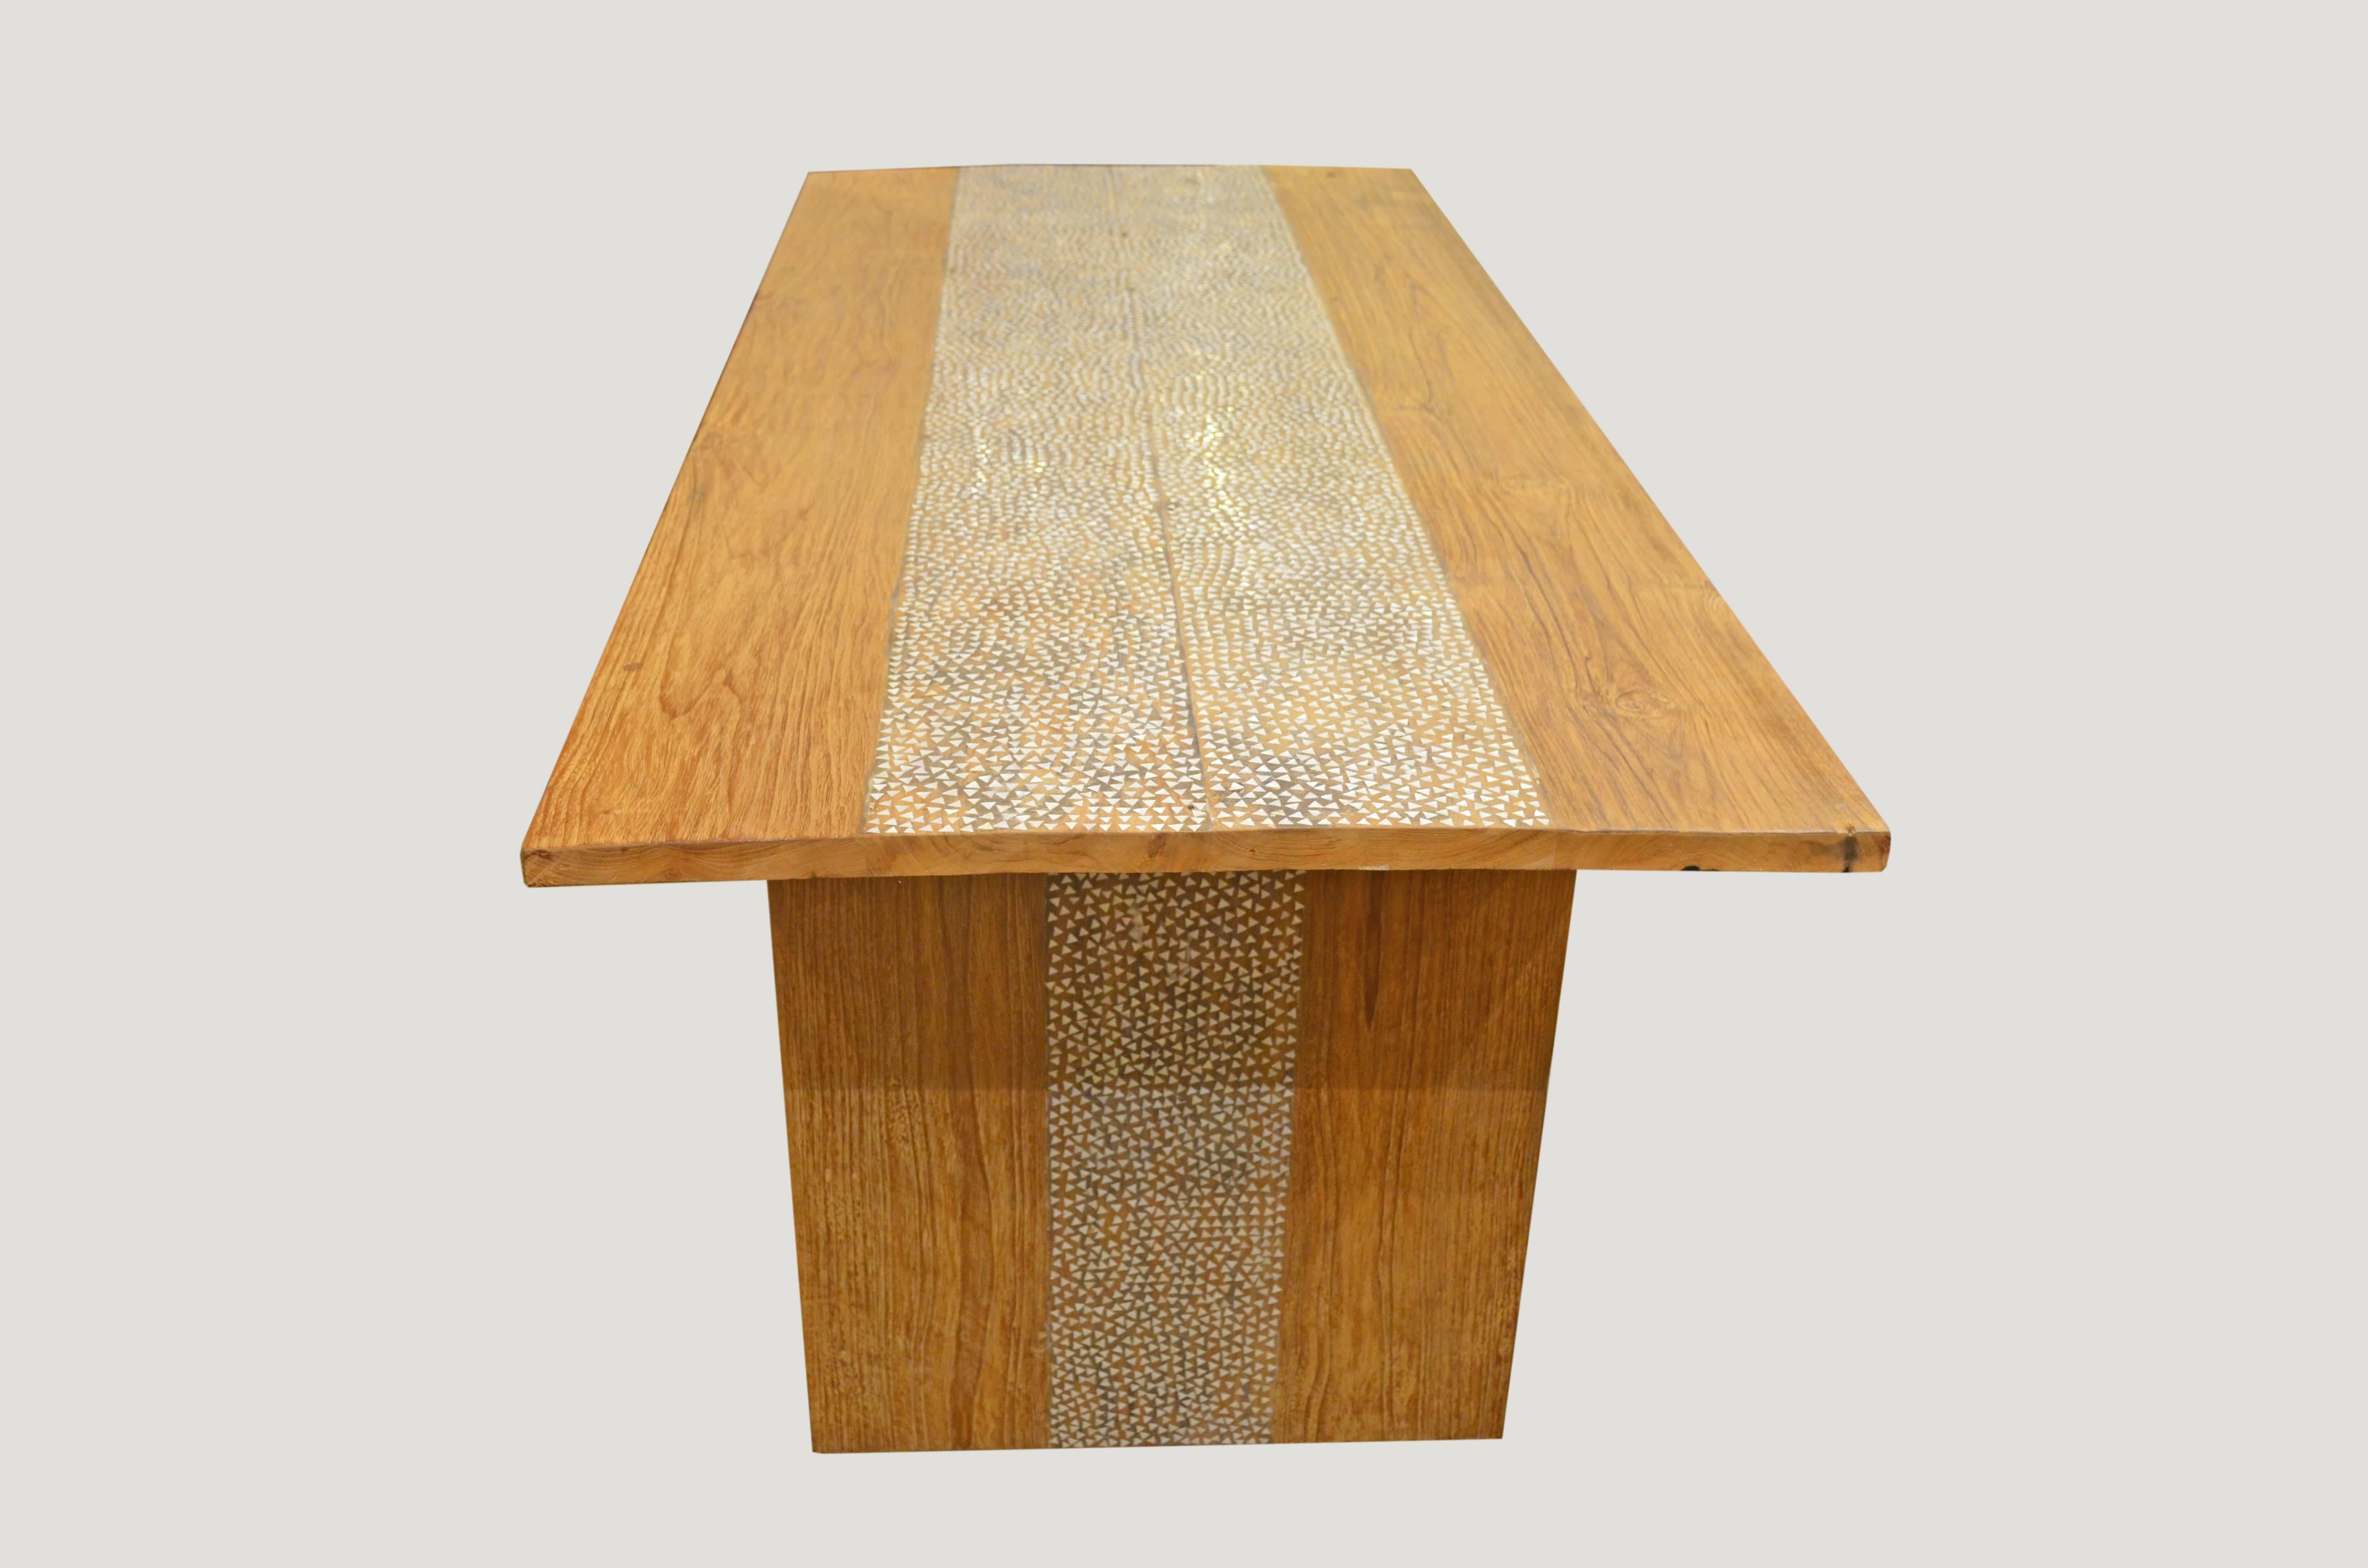 Reclaimed teak wood with added shell inlay on the top and legs. Hand cut shell is inlaid into the teak wood on this minimalist style dining table that can also be used as a desk or console.

Own an Andrianna Shamaris original.

Andrianna Shamaris,